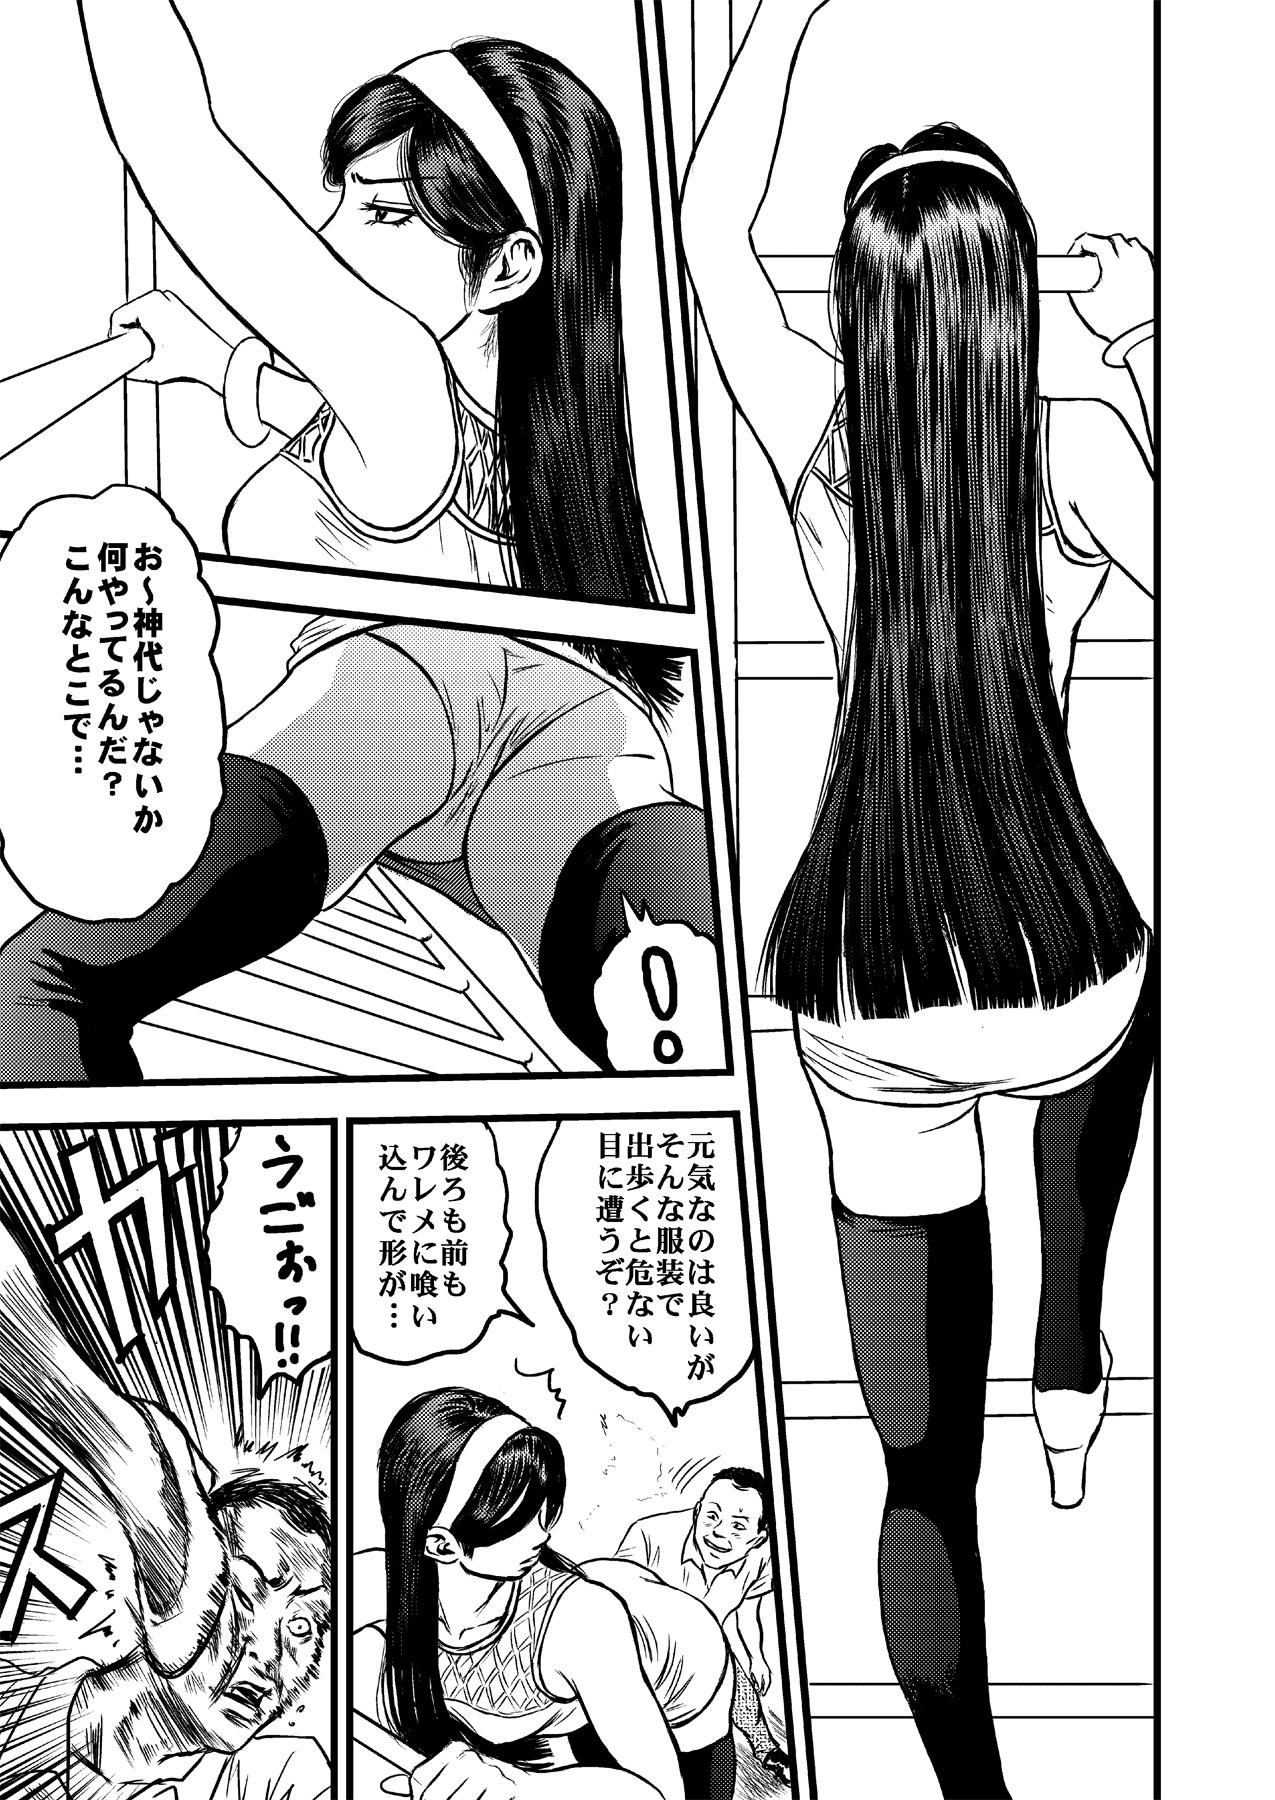 Big Black Cock Occult Ojousama no Yuuutsu - Occult academy Free Hardcore - Page 5